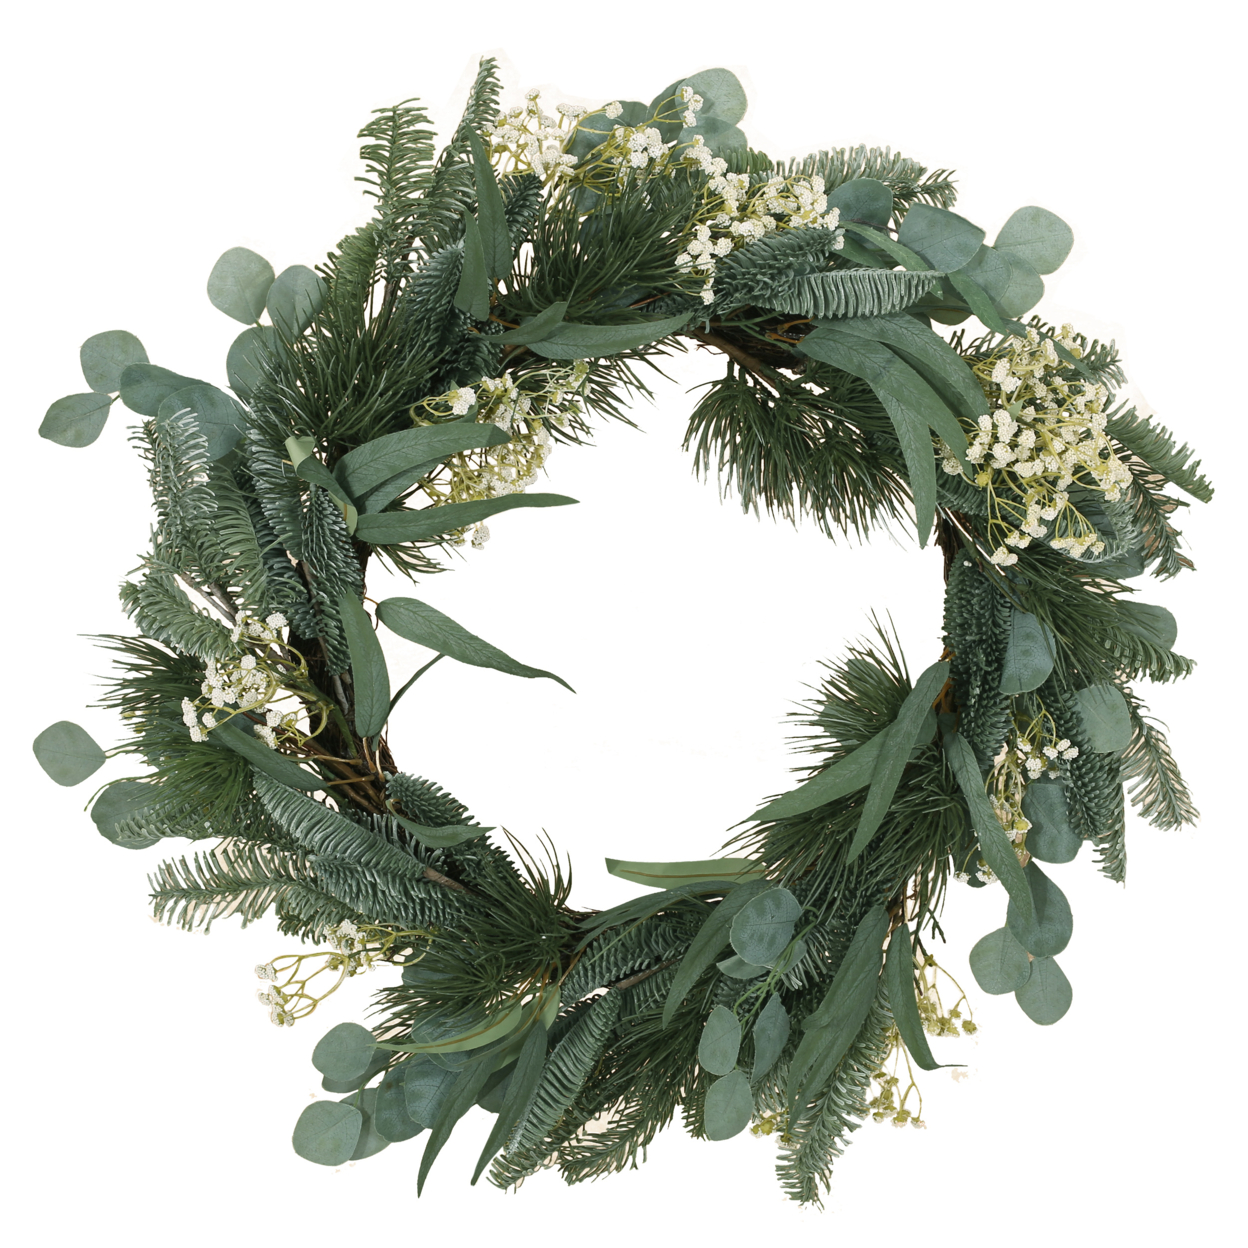 Leigh 30 Eucalyptus And Pine Artificial Silk Wreath With Baby's Breath, Green And White